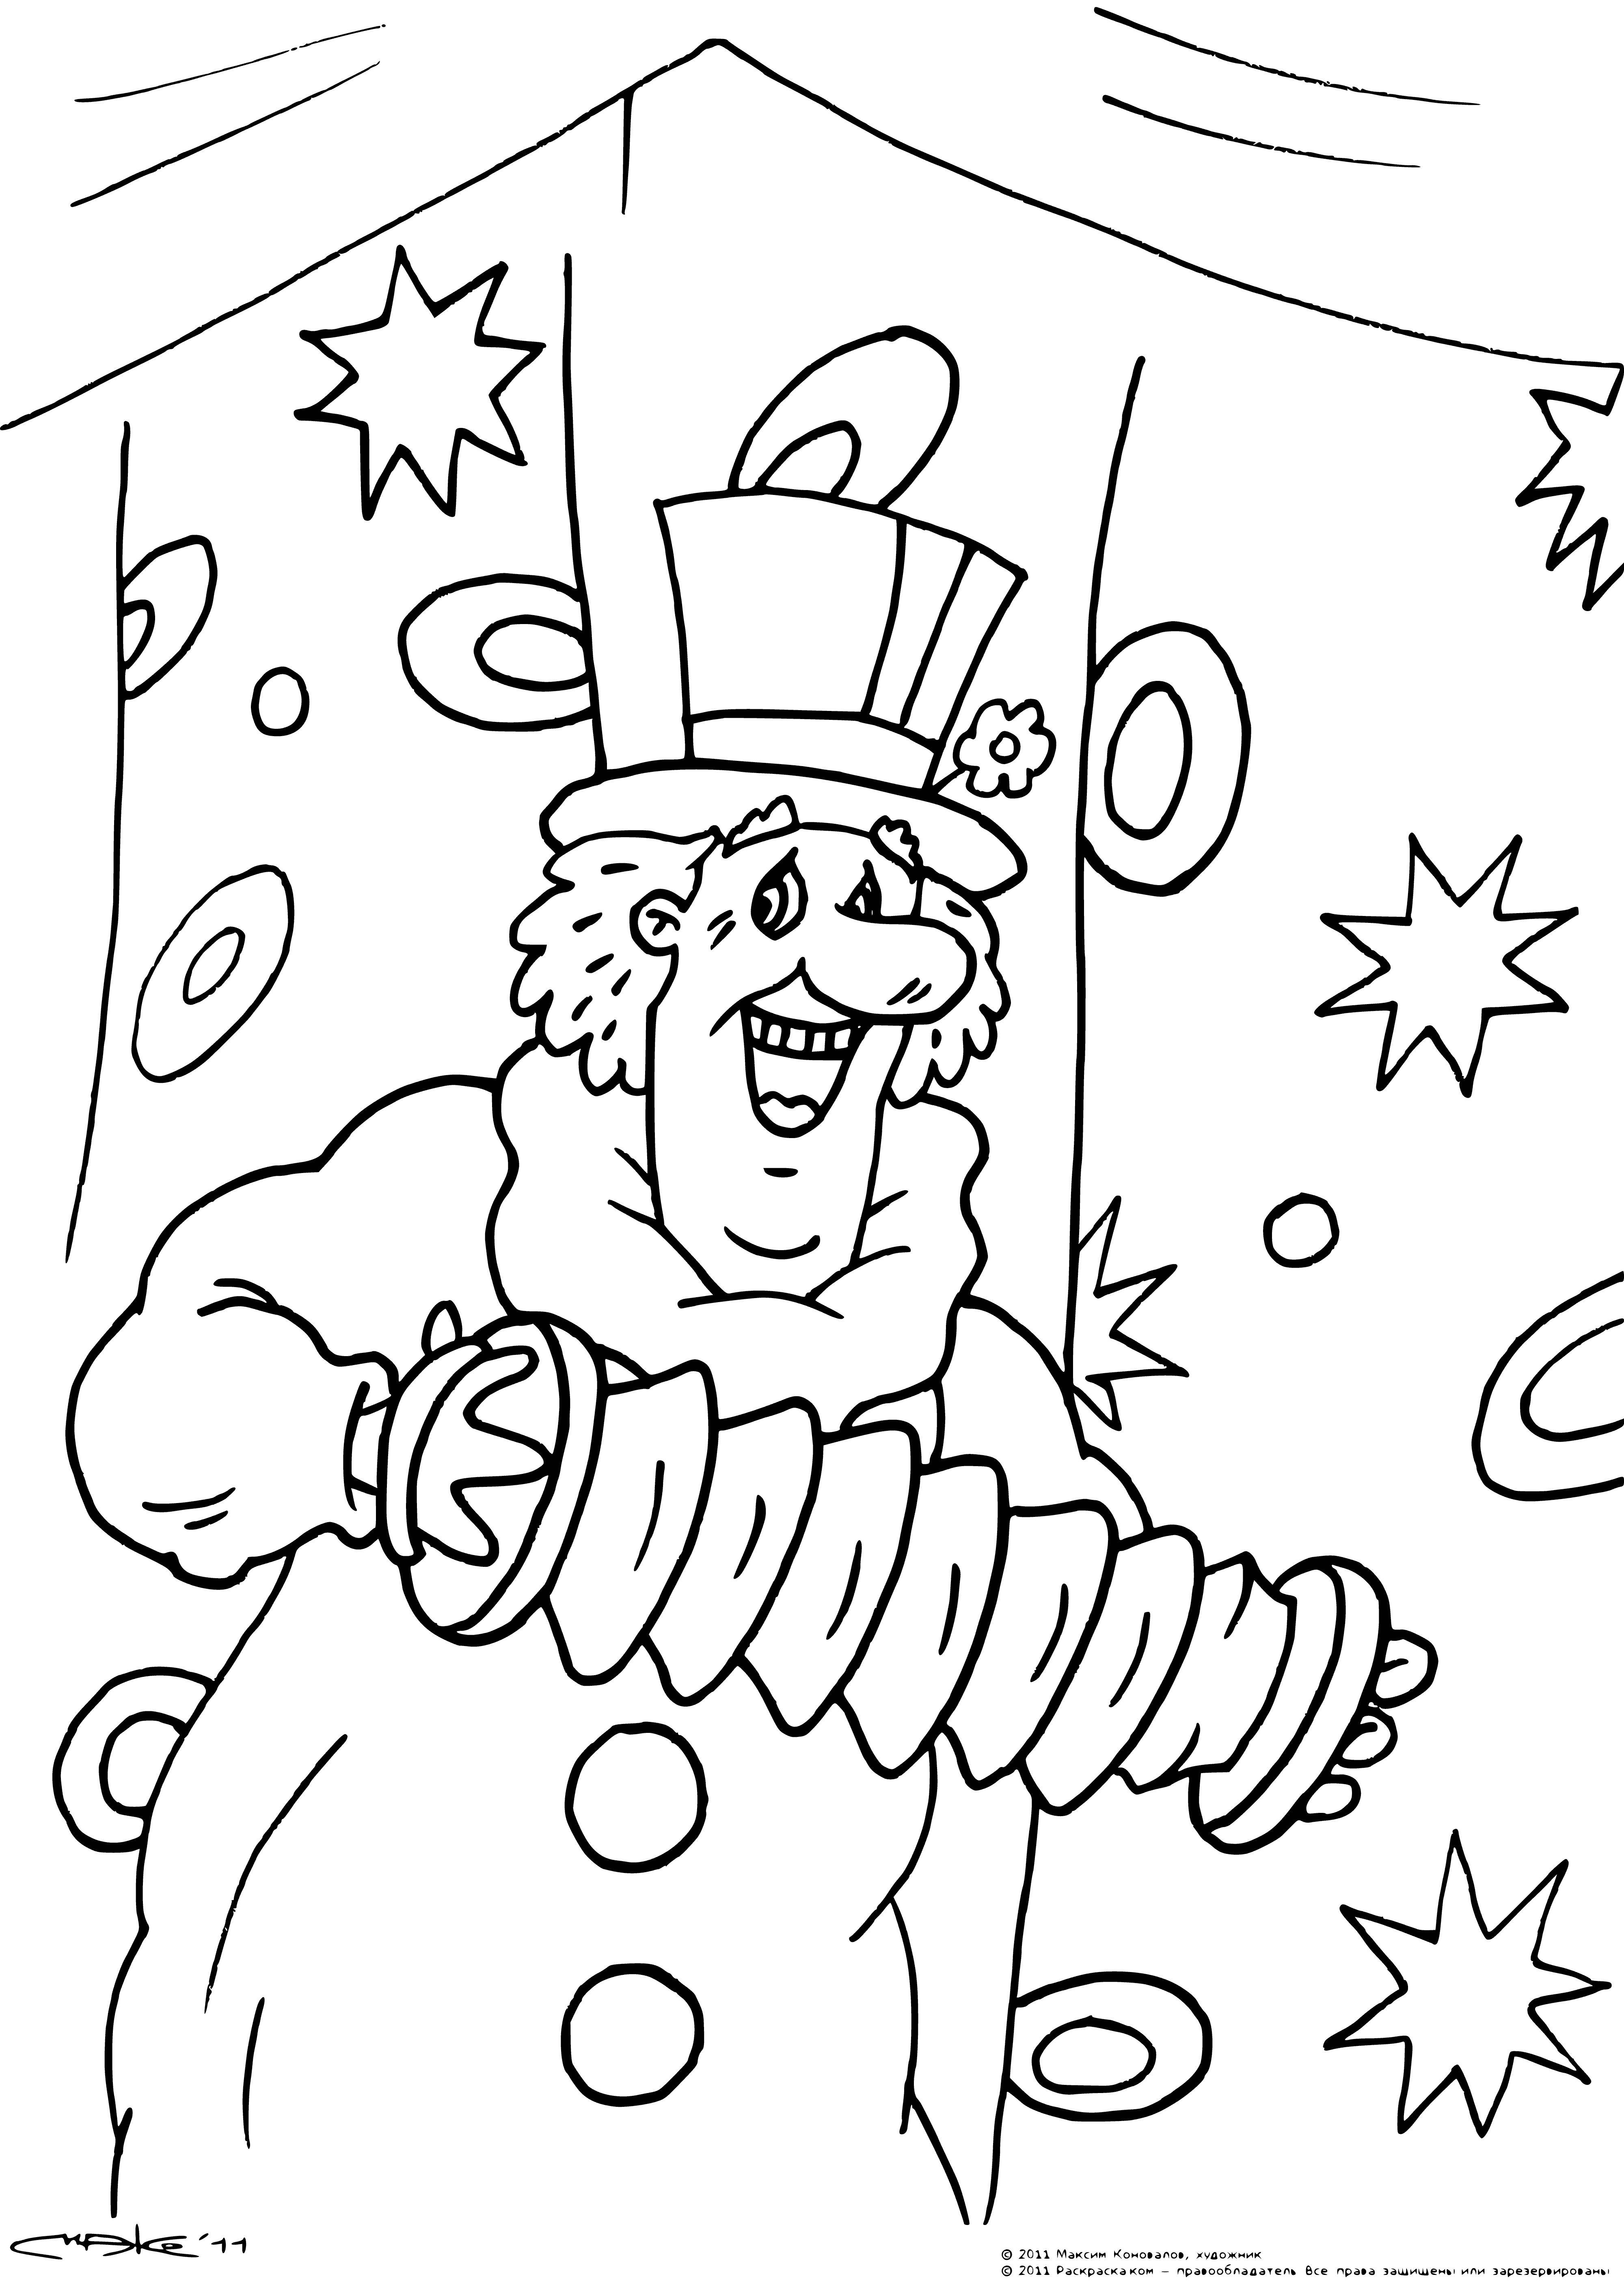 coloring page: Creature with furry appendages, sharp teeth, and arms in the air stands in orange center of page. Behind it, blue sky and two green creatures running away.